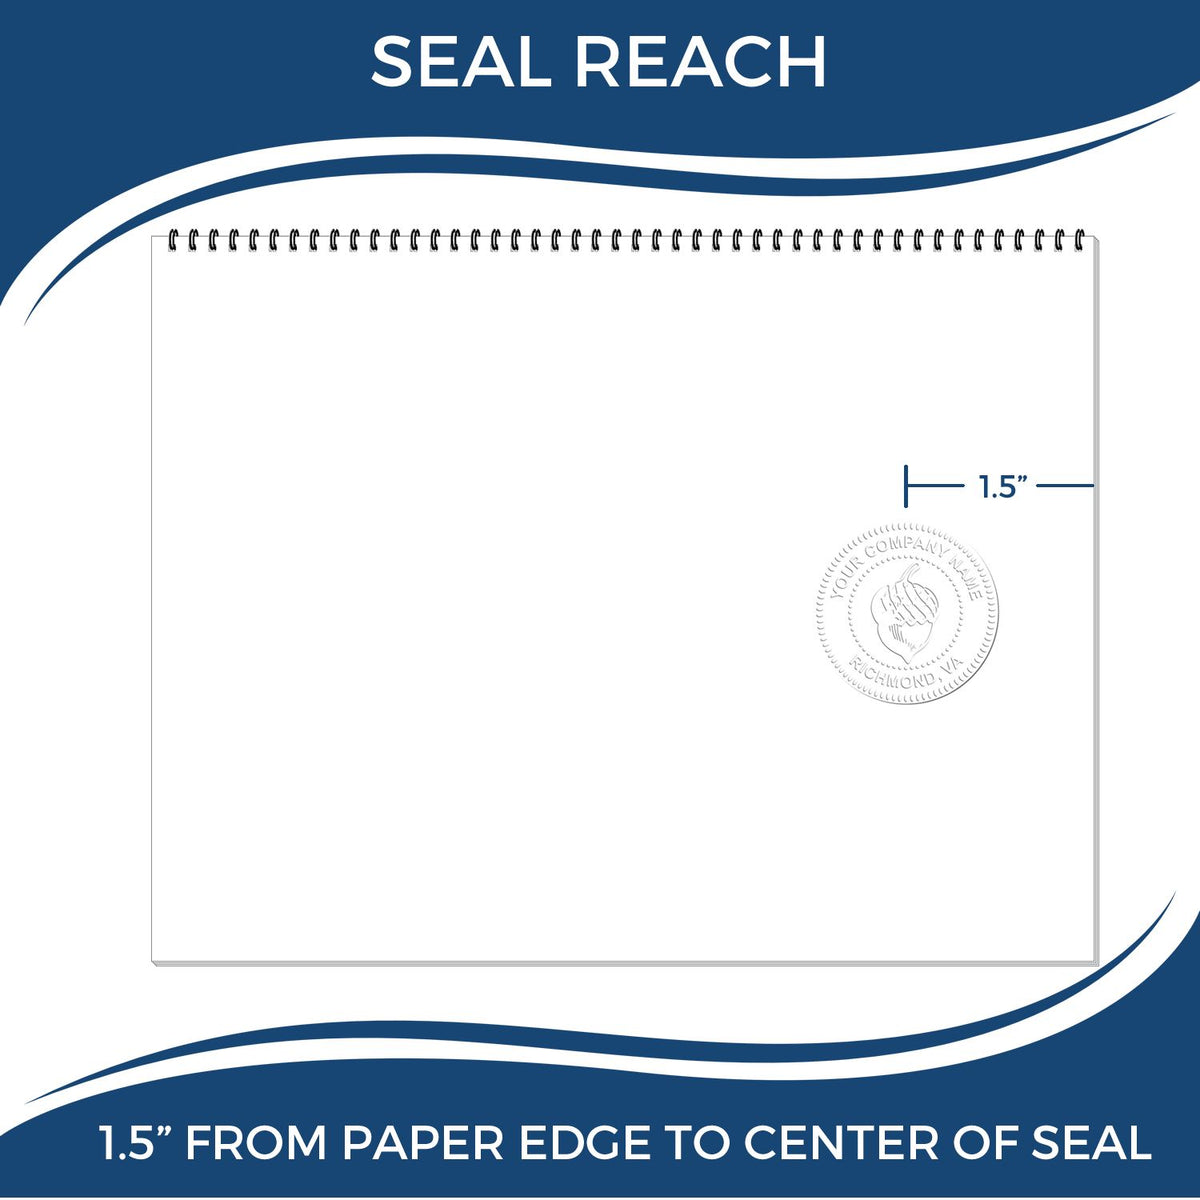 An infographic showing the seal reach which is represented by a ruler and a miniature seal image of the Soft Pocket Oklahoma Landscape Architect Embosser